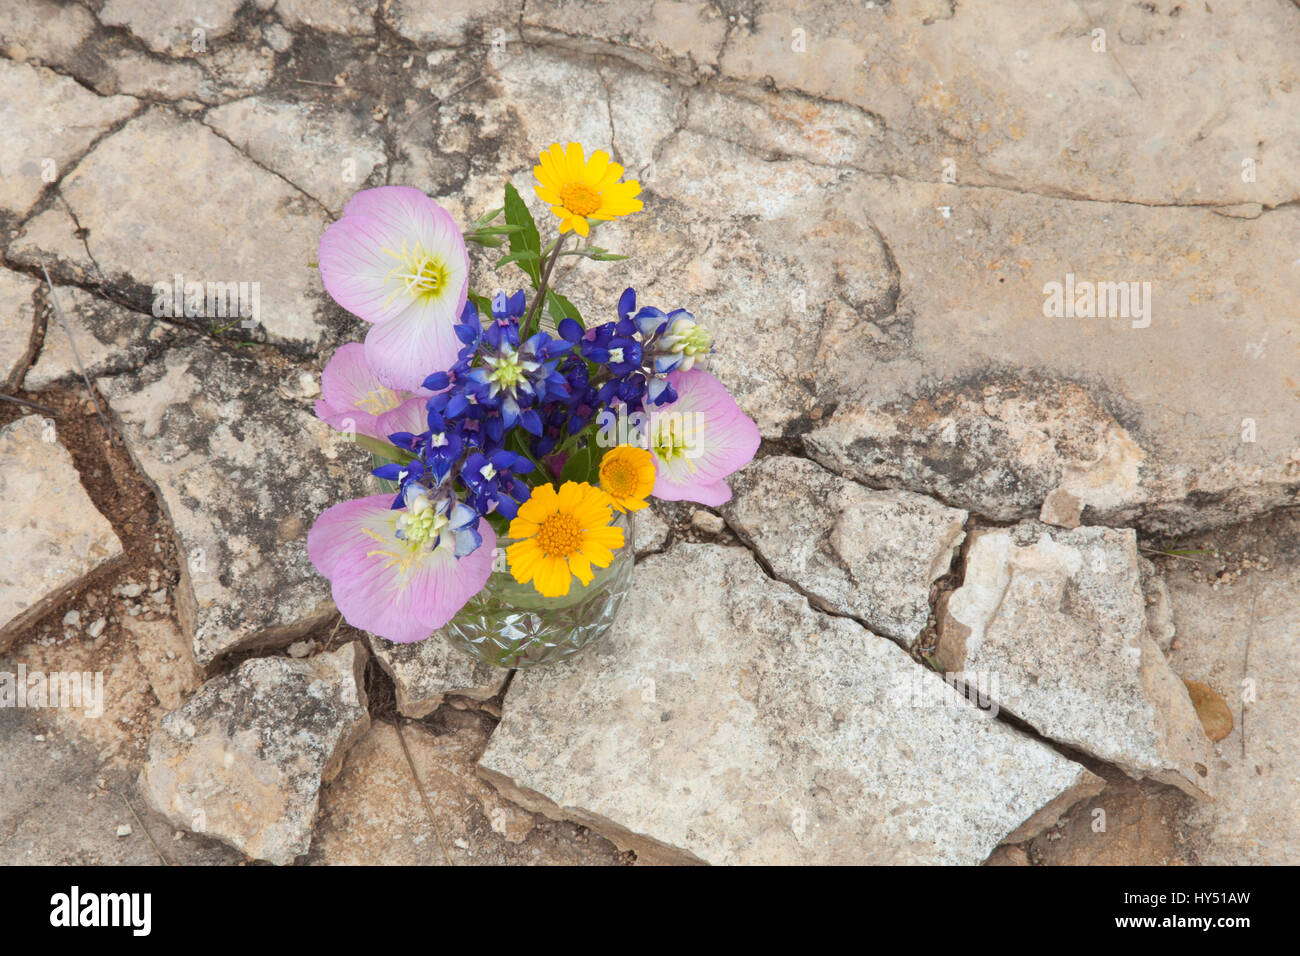 A bouquet of Texas wildflowers from the Texas Hill Country in a mason jar shot from overhead on stone ground. Evening primroses, bluebonnets and yello Stock Photo